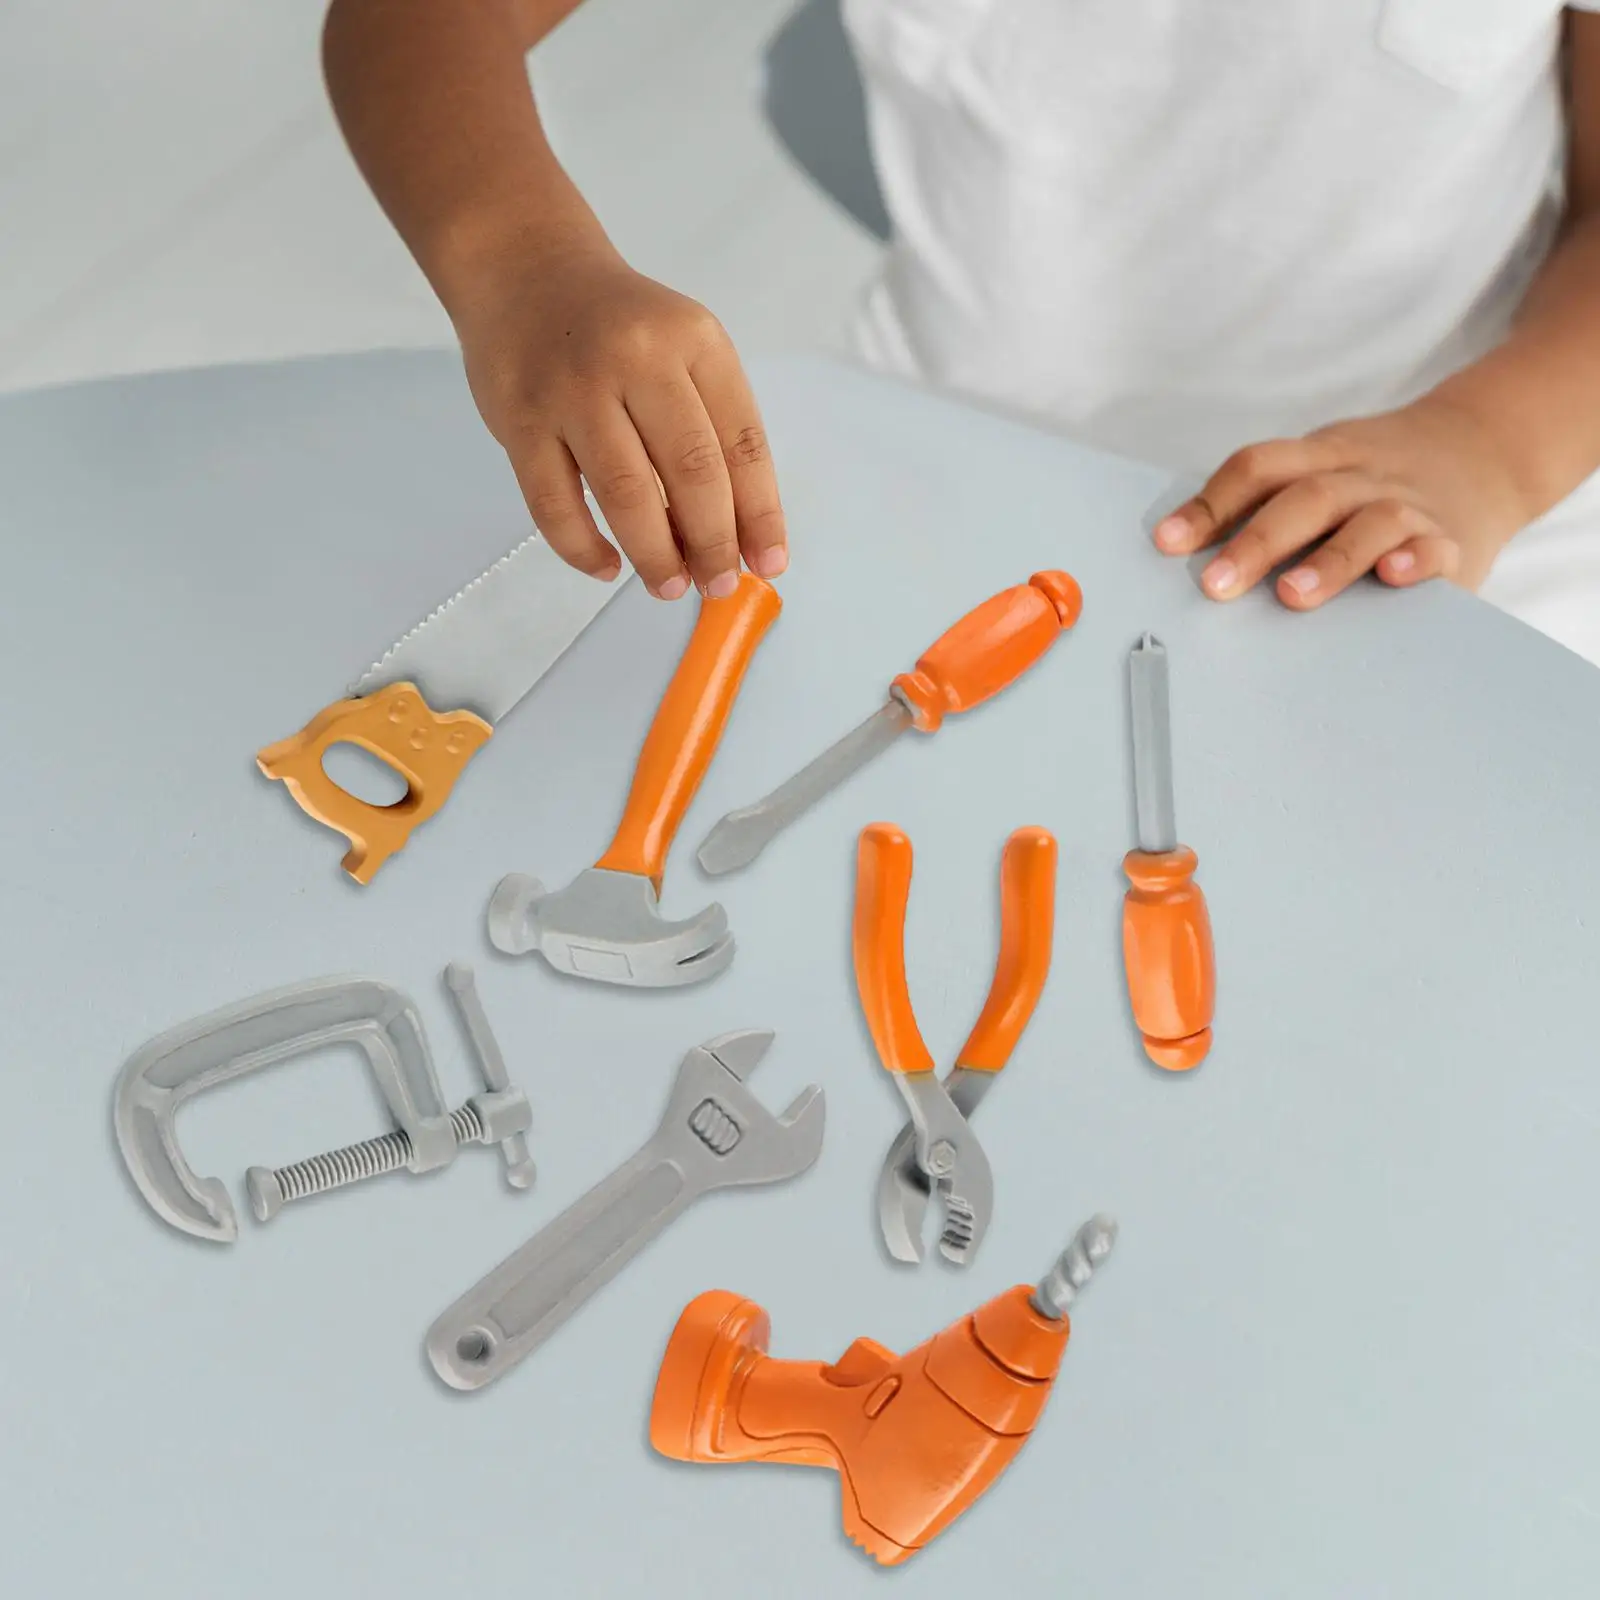 8 Pieces Kids Play Tool Set Fine Motor Skills Learning Activities for Birthday Gift